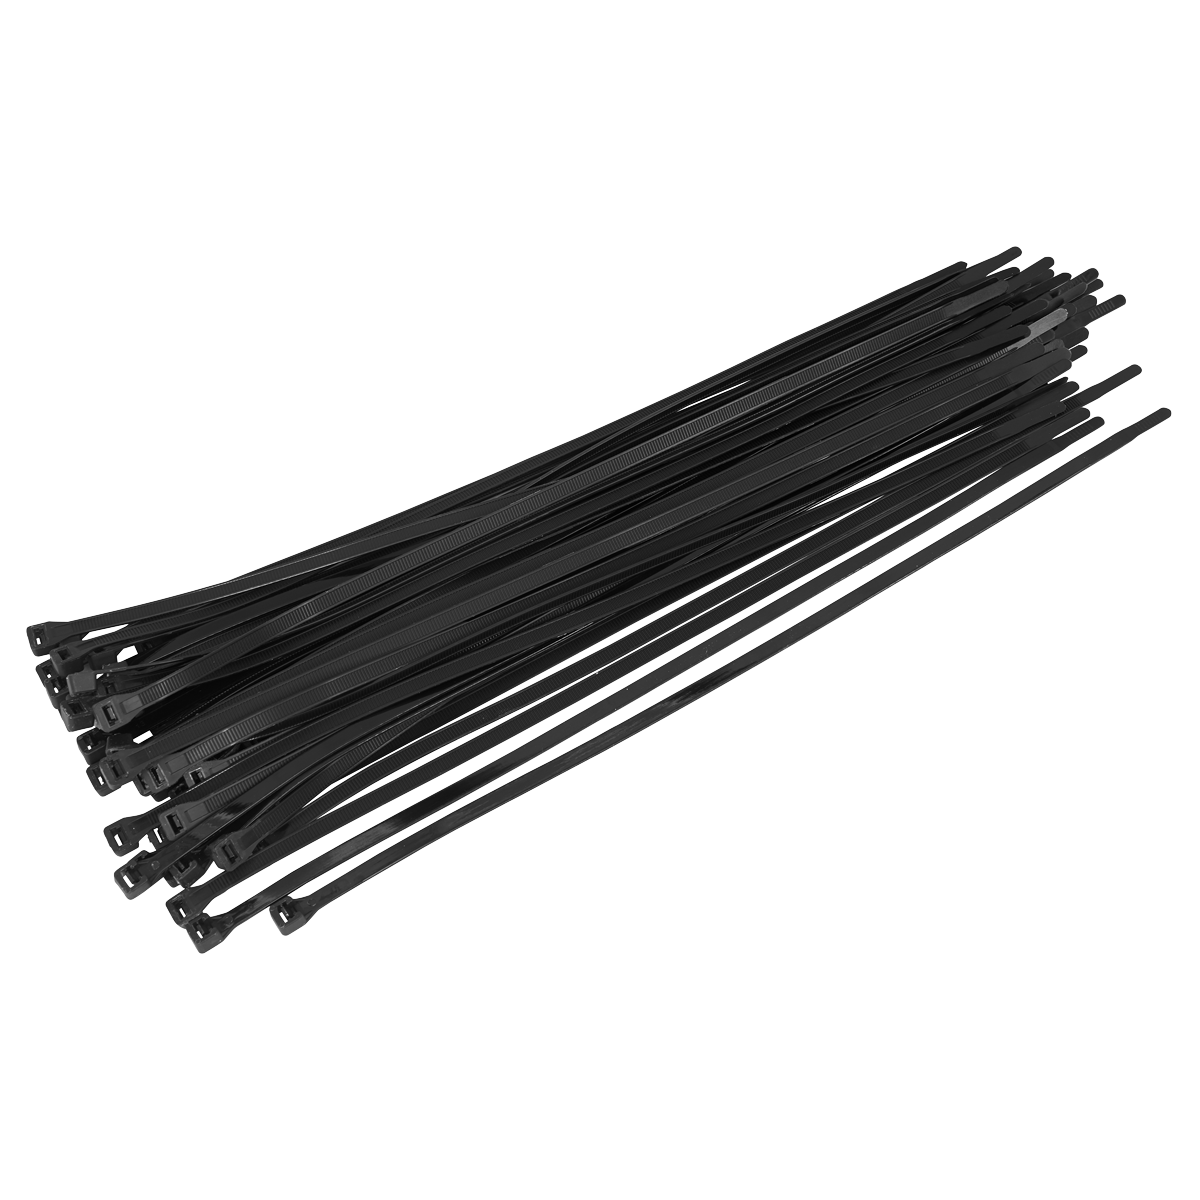 Cable Tie 450 x 7.6mm Black Pack of 50 - CT45076P50 - Farming Parts